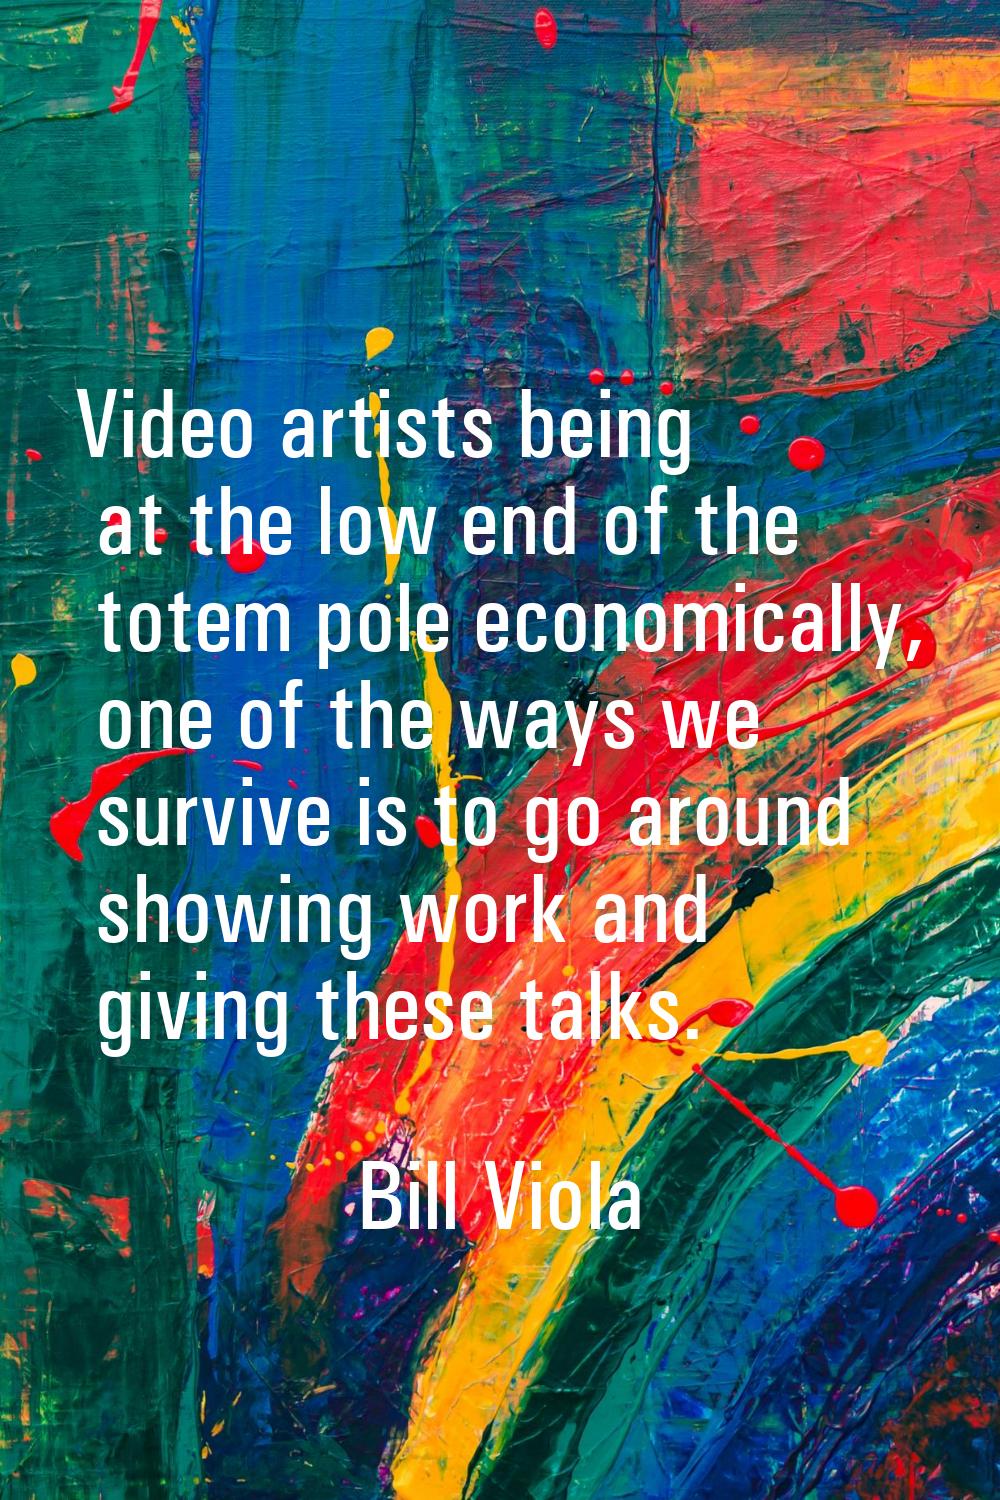 Video artists being at the low end of the totem pole economically, one of the ways we survive is to